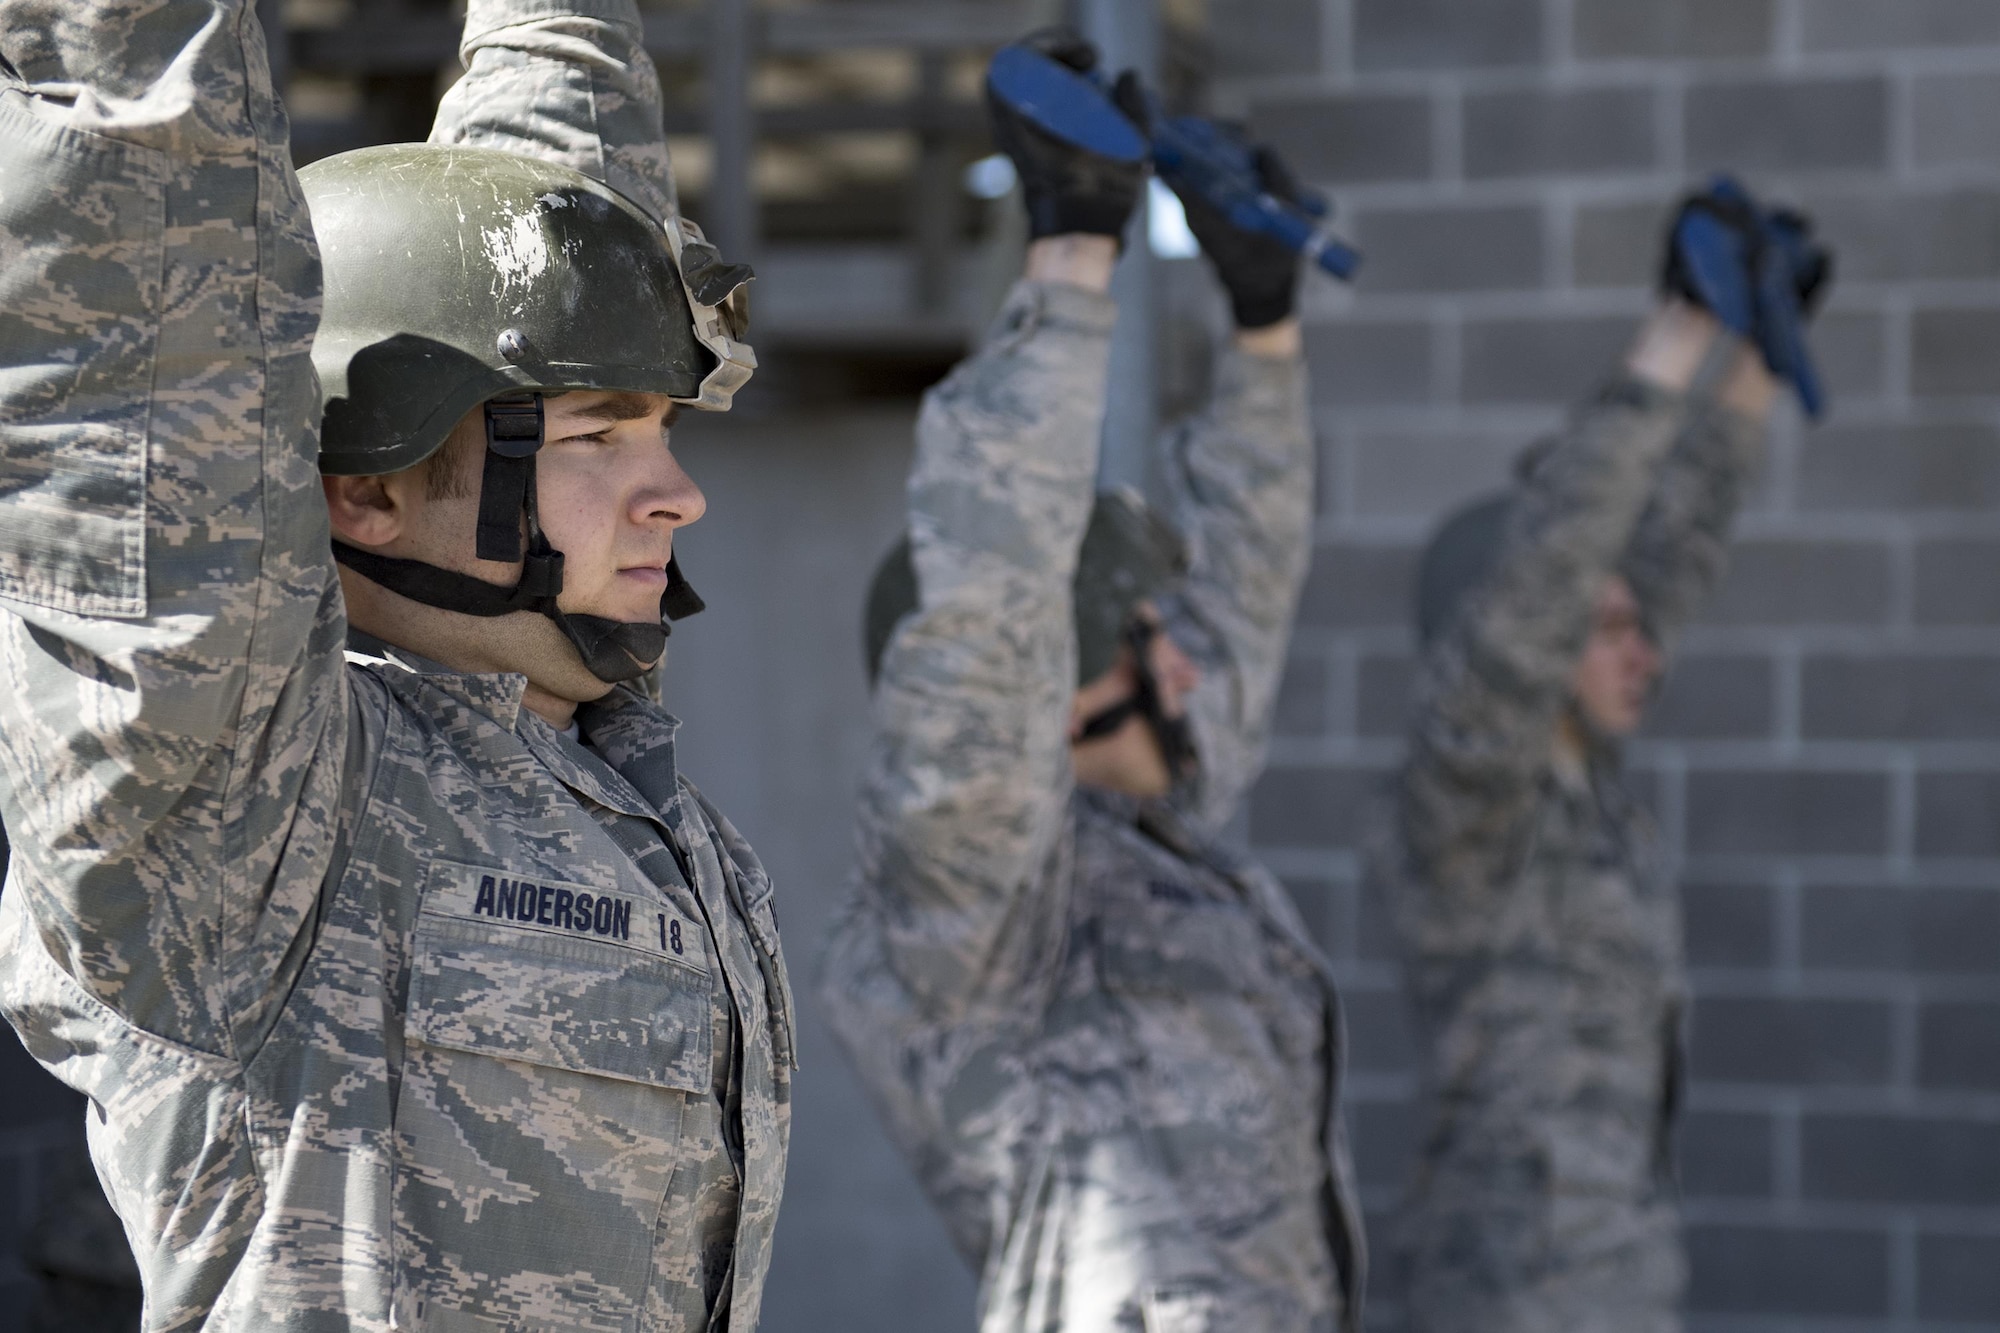 Air Force Academy Cadet Anderson holds a training rifle above his head during tasked obstacle training at an Air Liaison Officer Aptitude assessment, Feb. 14, 2017, at Camp Bullis, Texas. The cadets were divided into two groups for the tasked obstacle portion of the assessment, leaving the other group time to work out. (U.S. Air Force photo by Airman 1st Class Daniel Snider)